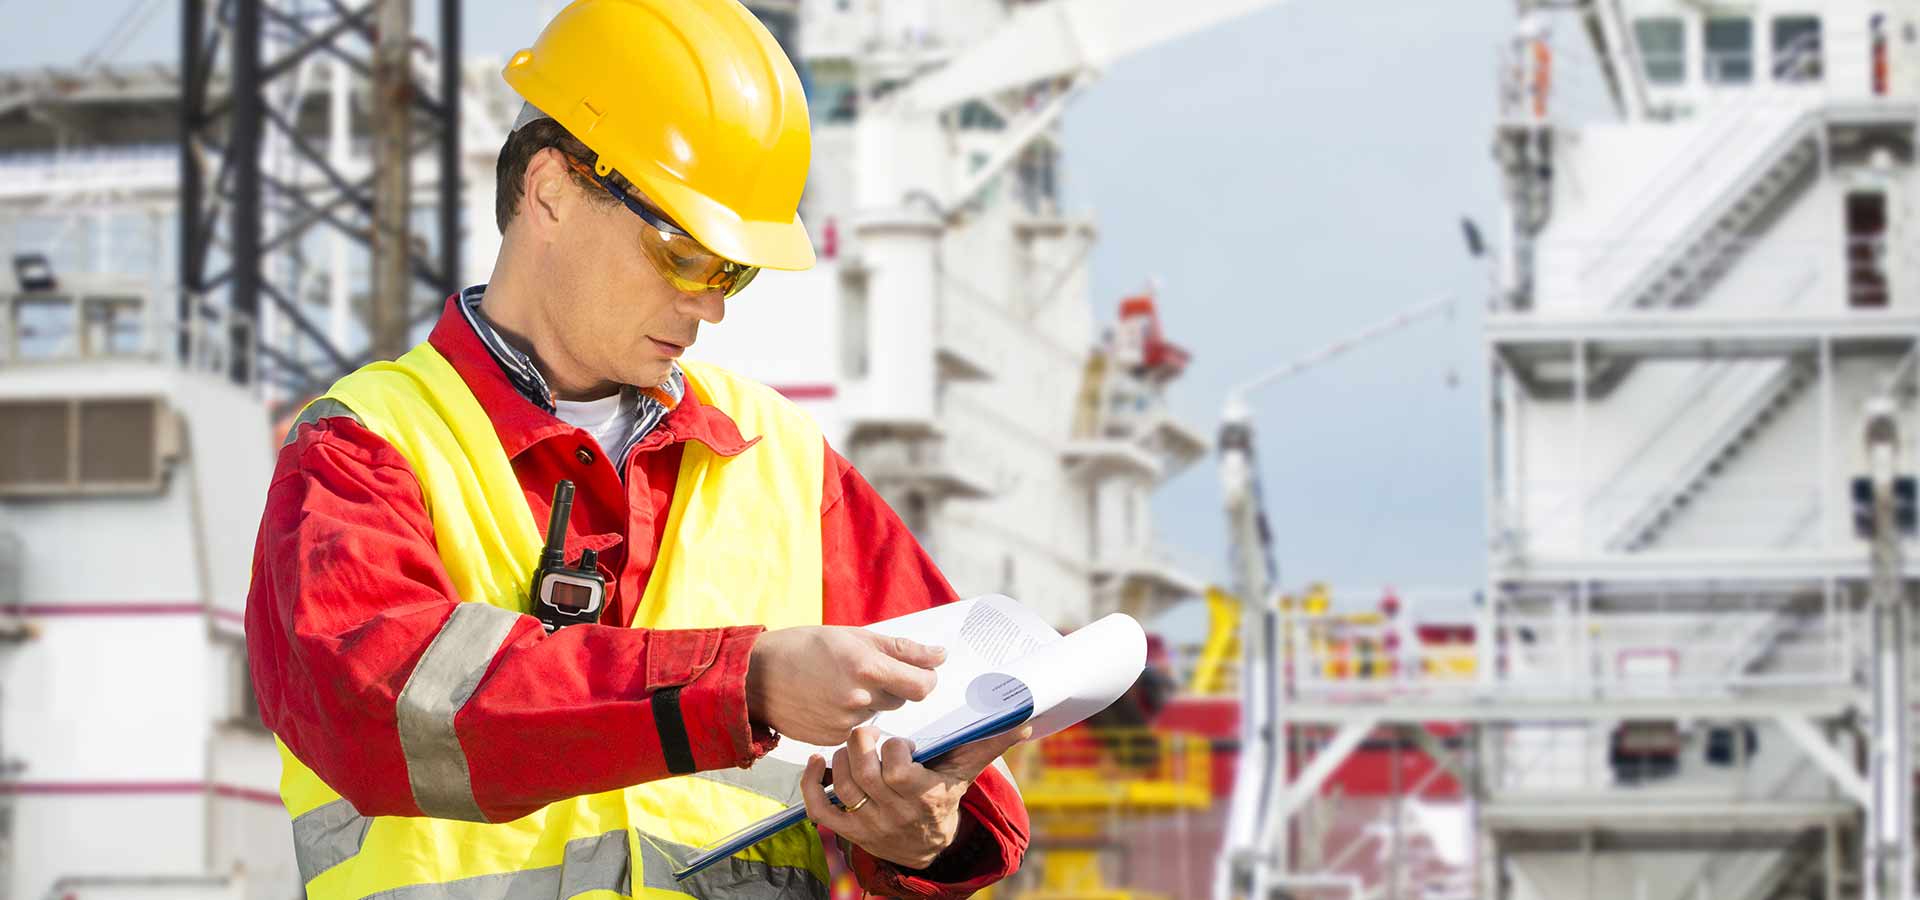 Logistics jobs in oil and gas industry